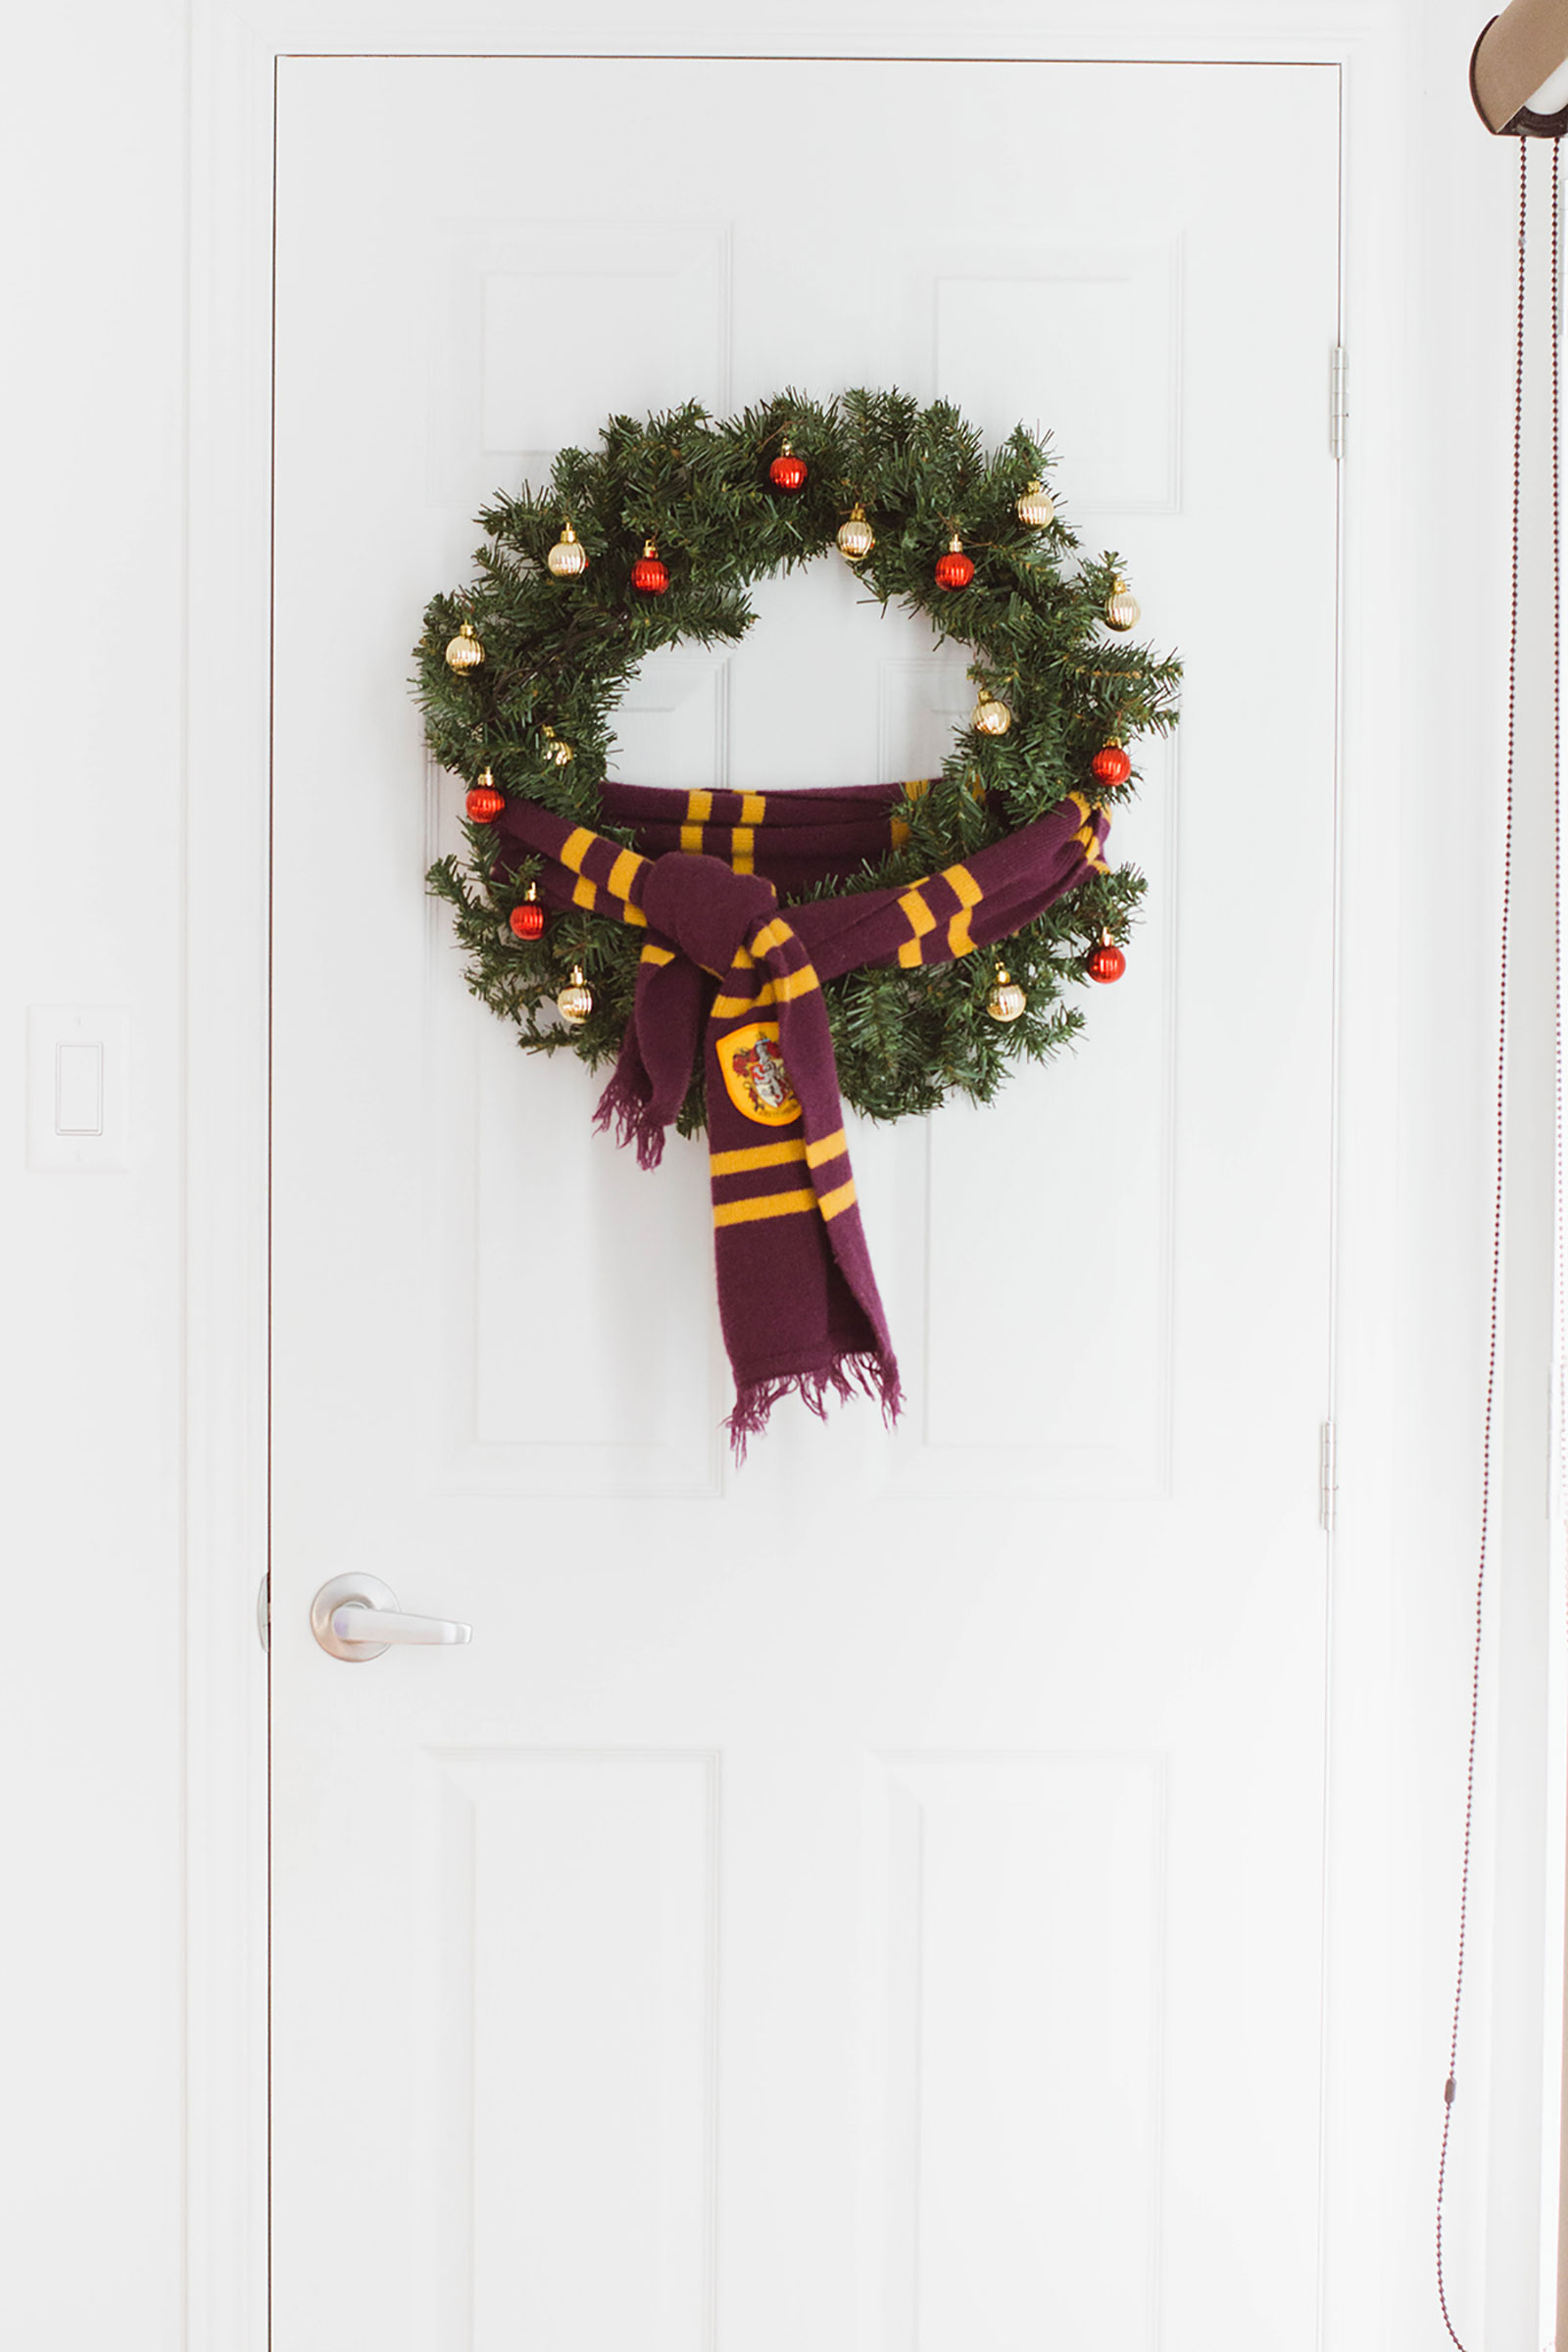 Christmas Reveal: Our Holiday Decor Inspired by Harry Potter